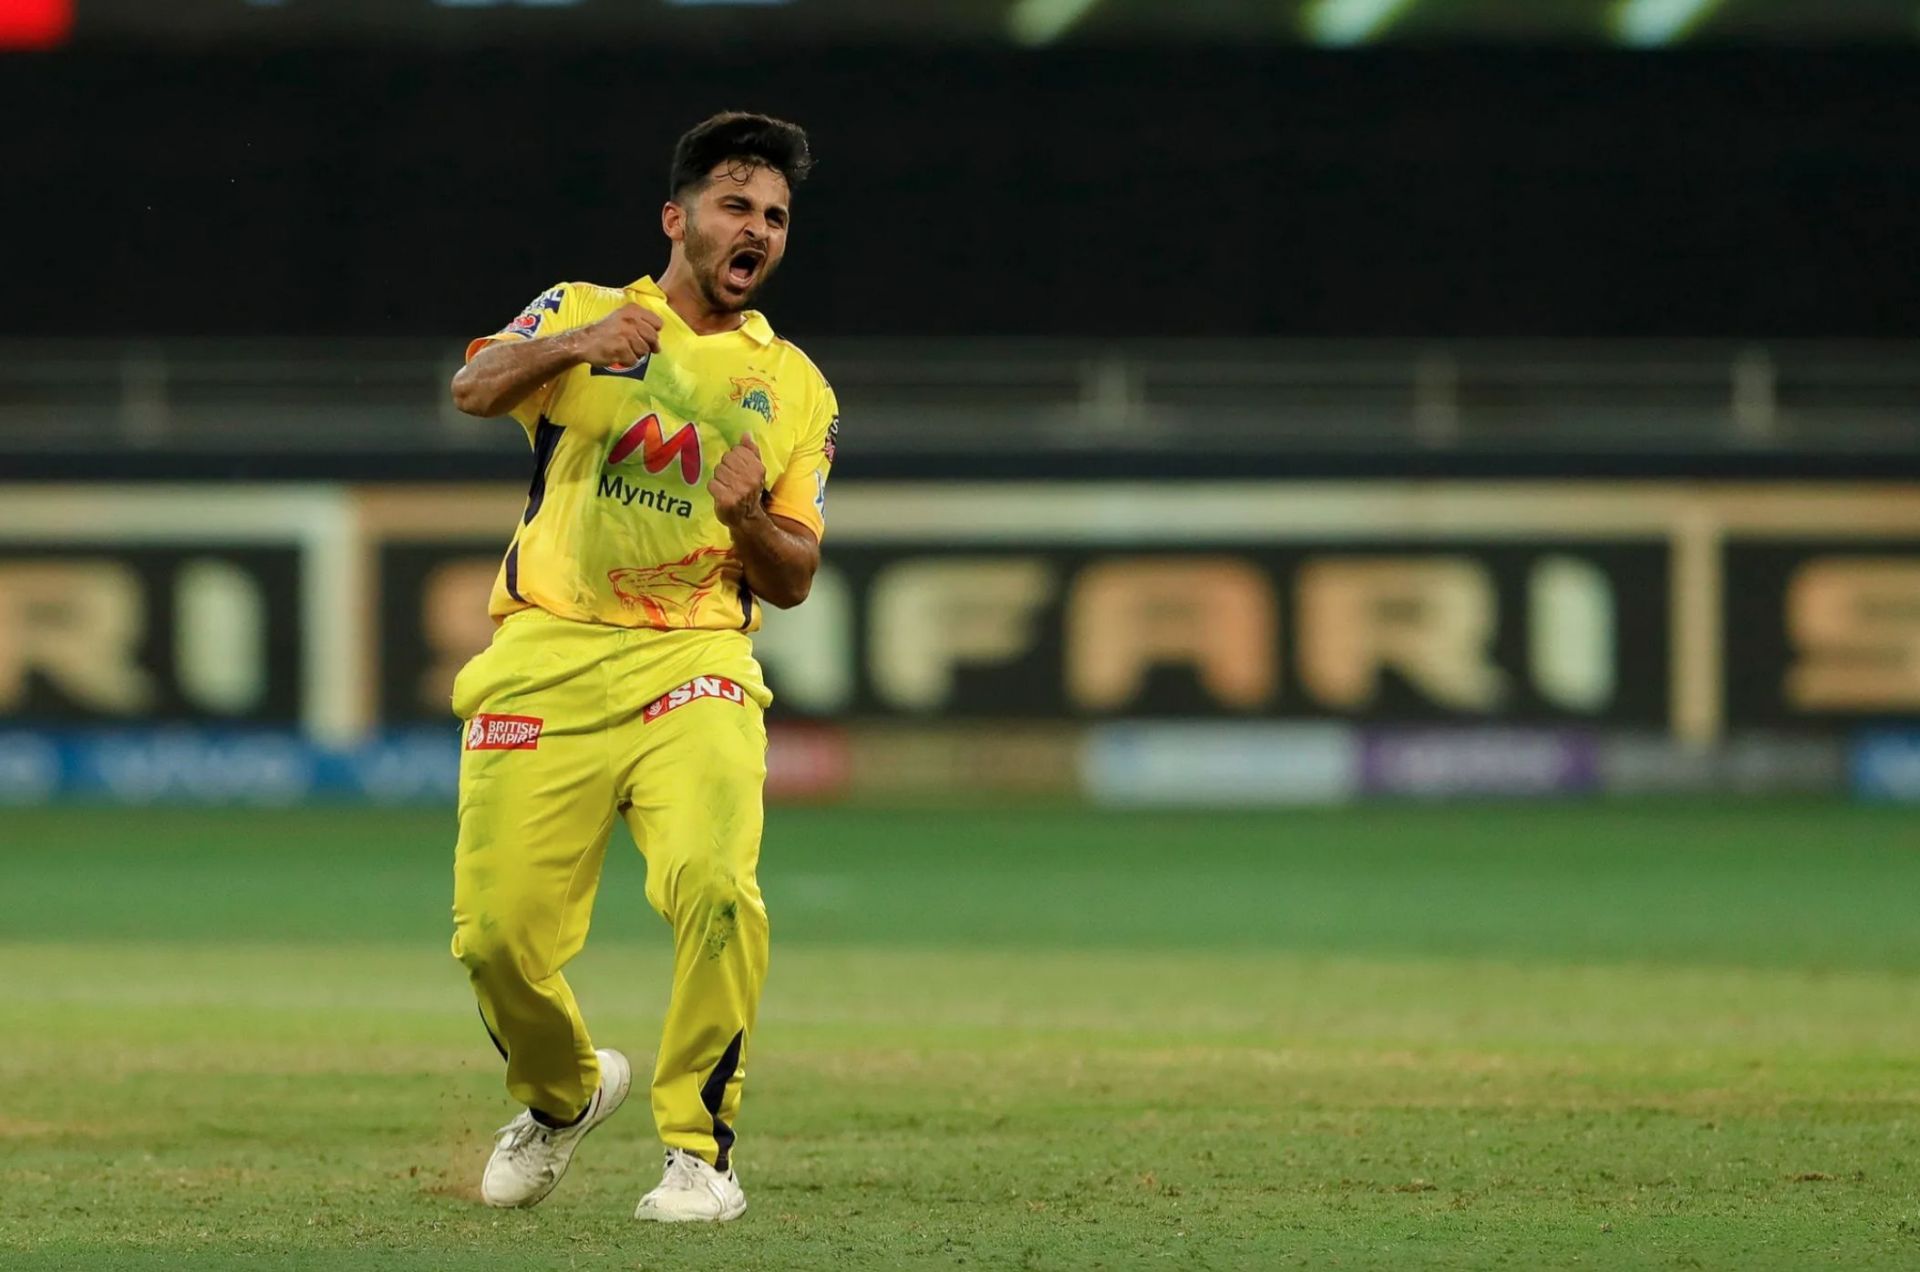 Shardul Thakur has said that the Chennai Super Kings will count on their experience to win the IPL final (Image: IPL)